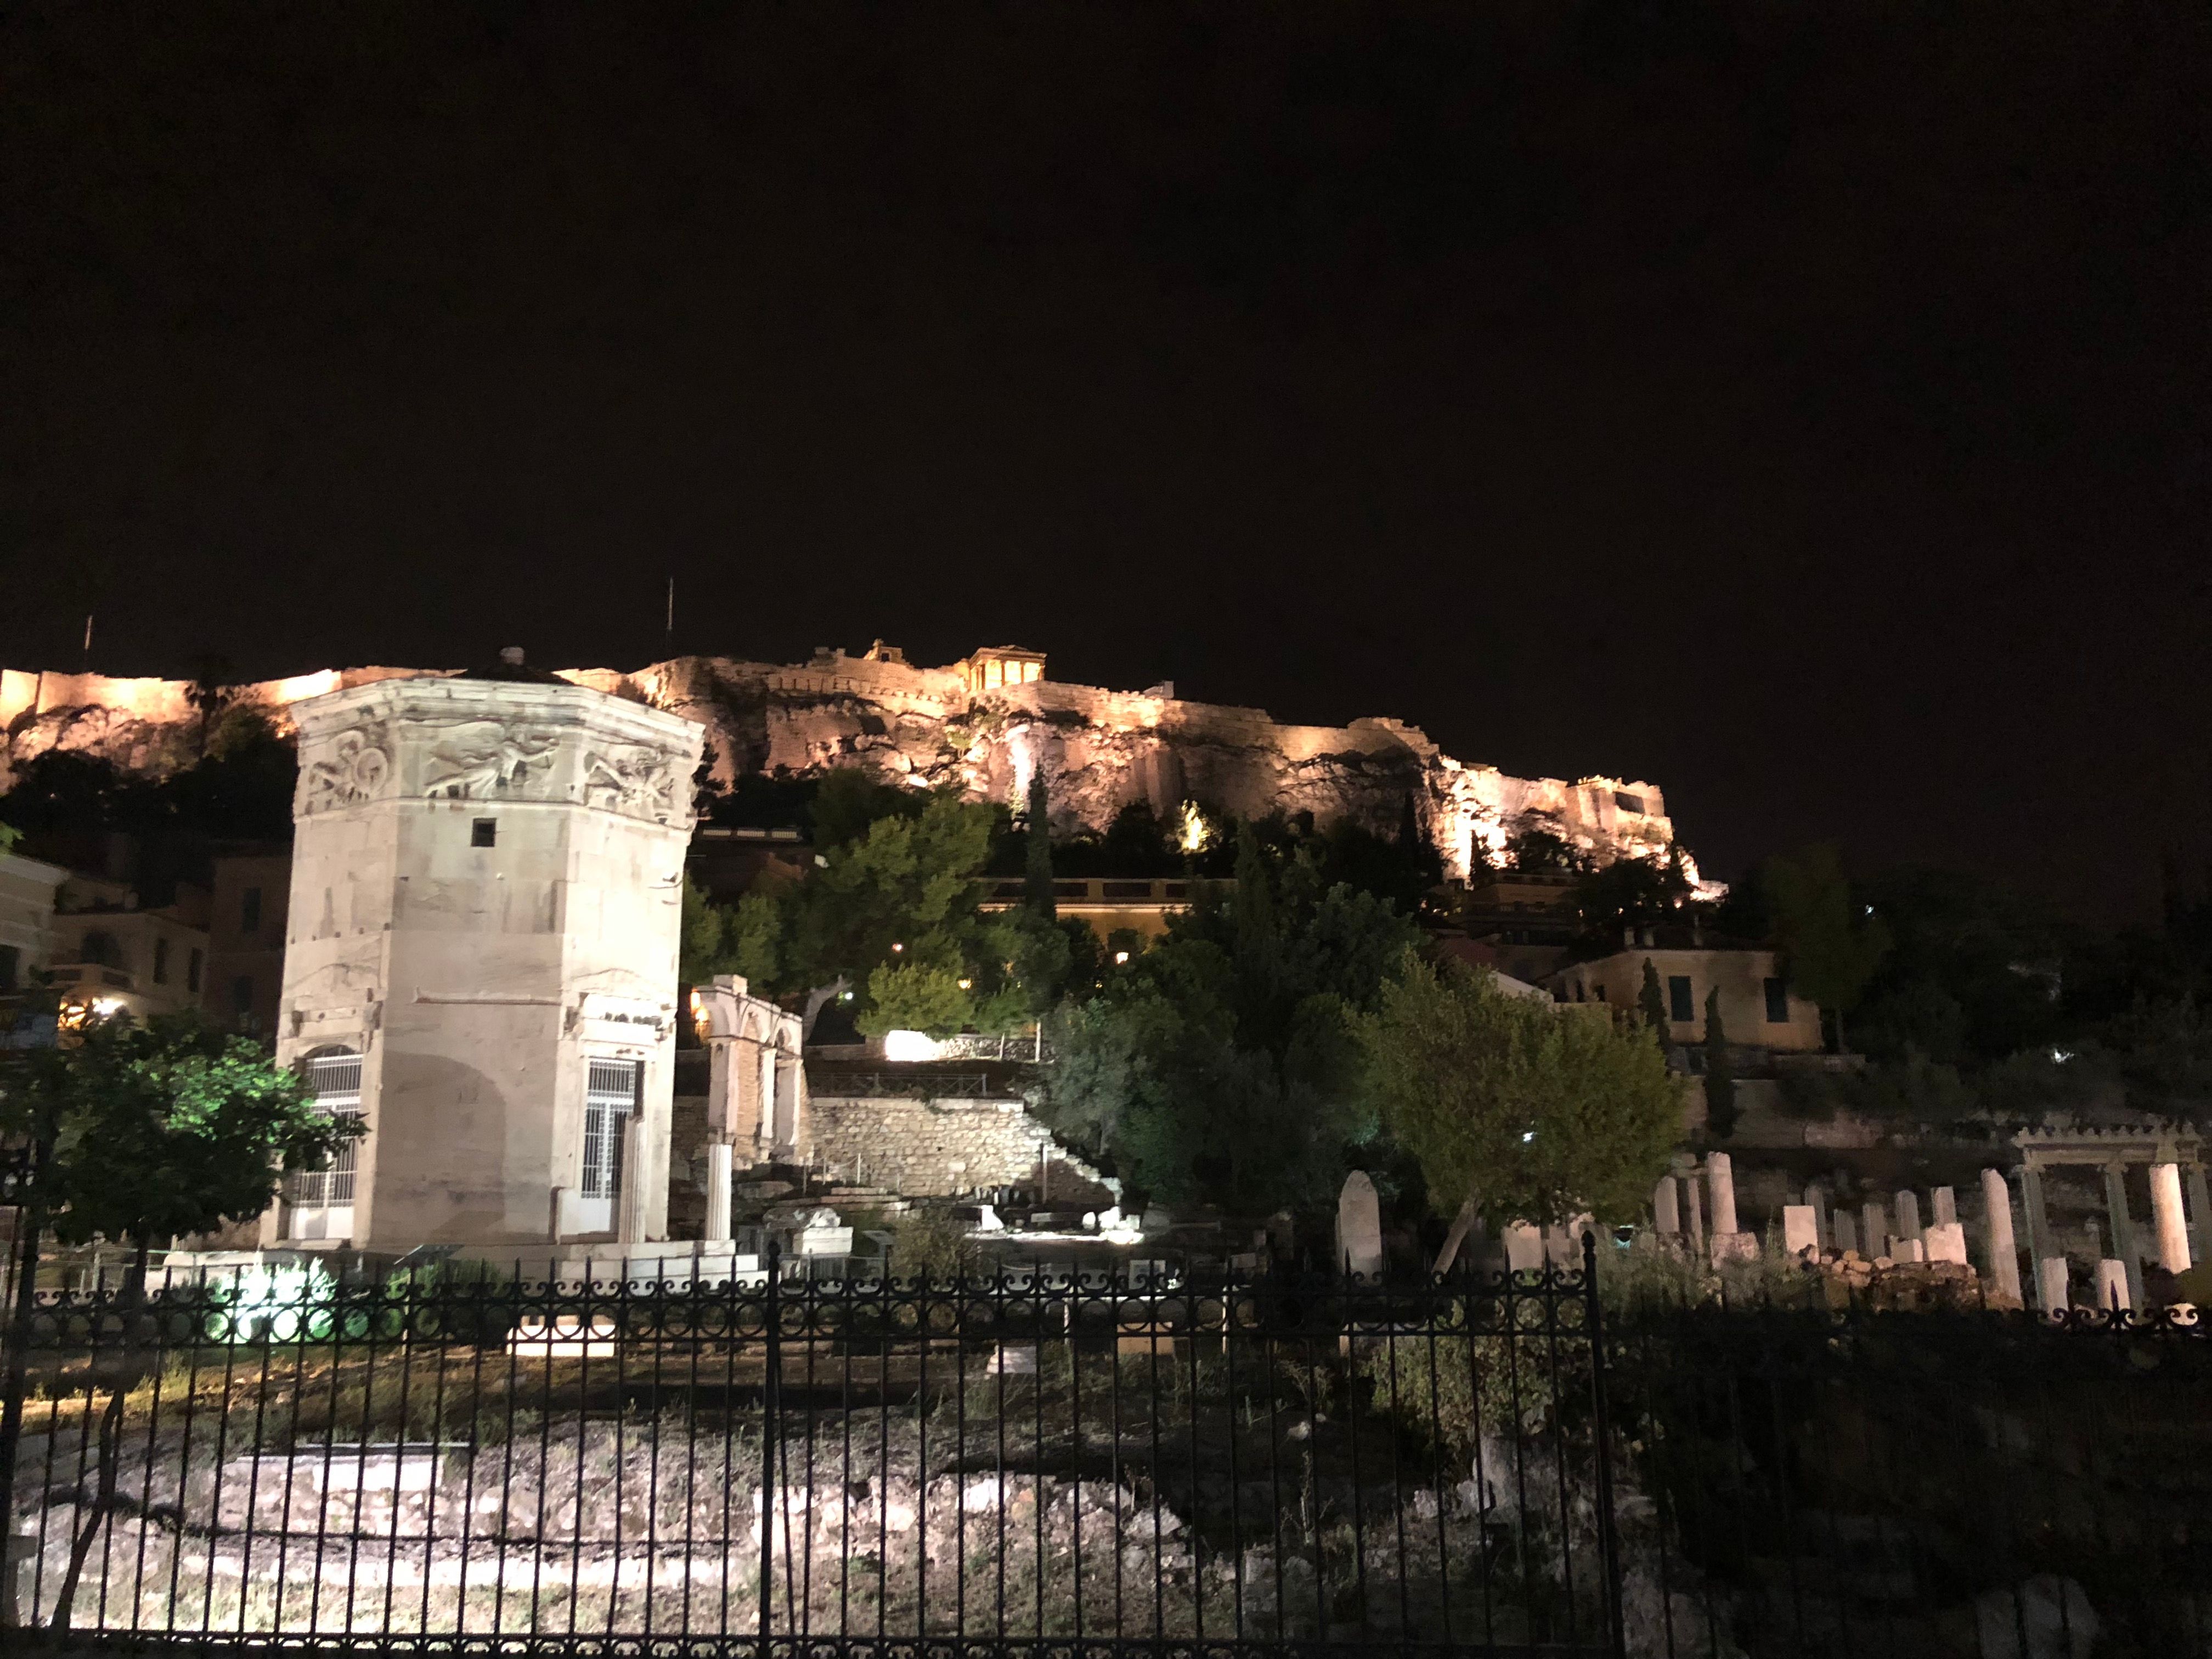 Caption: photo taken during the night from the outside of Acropolis of Athens, on the left a very ancient o'clock with the Parthenon (Local Guide @FelipePk).